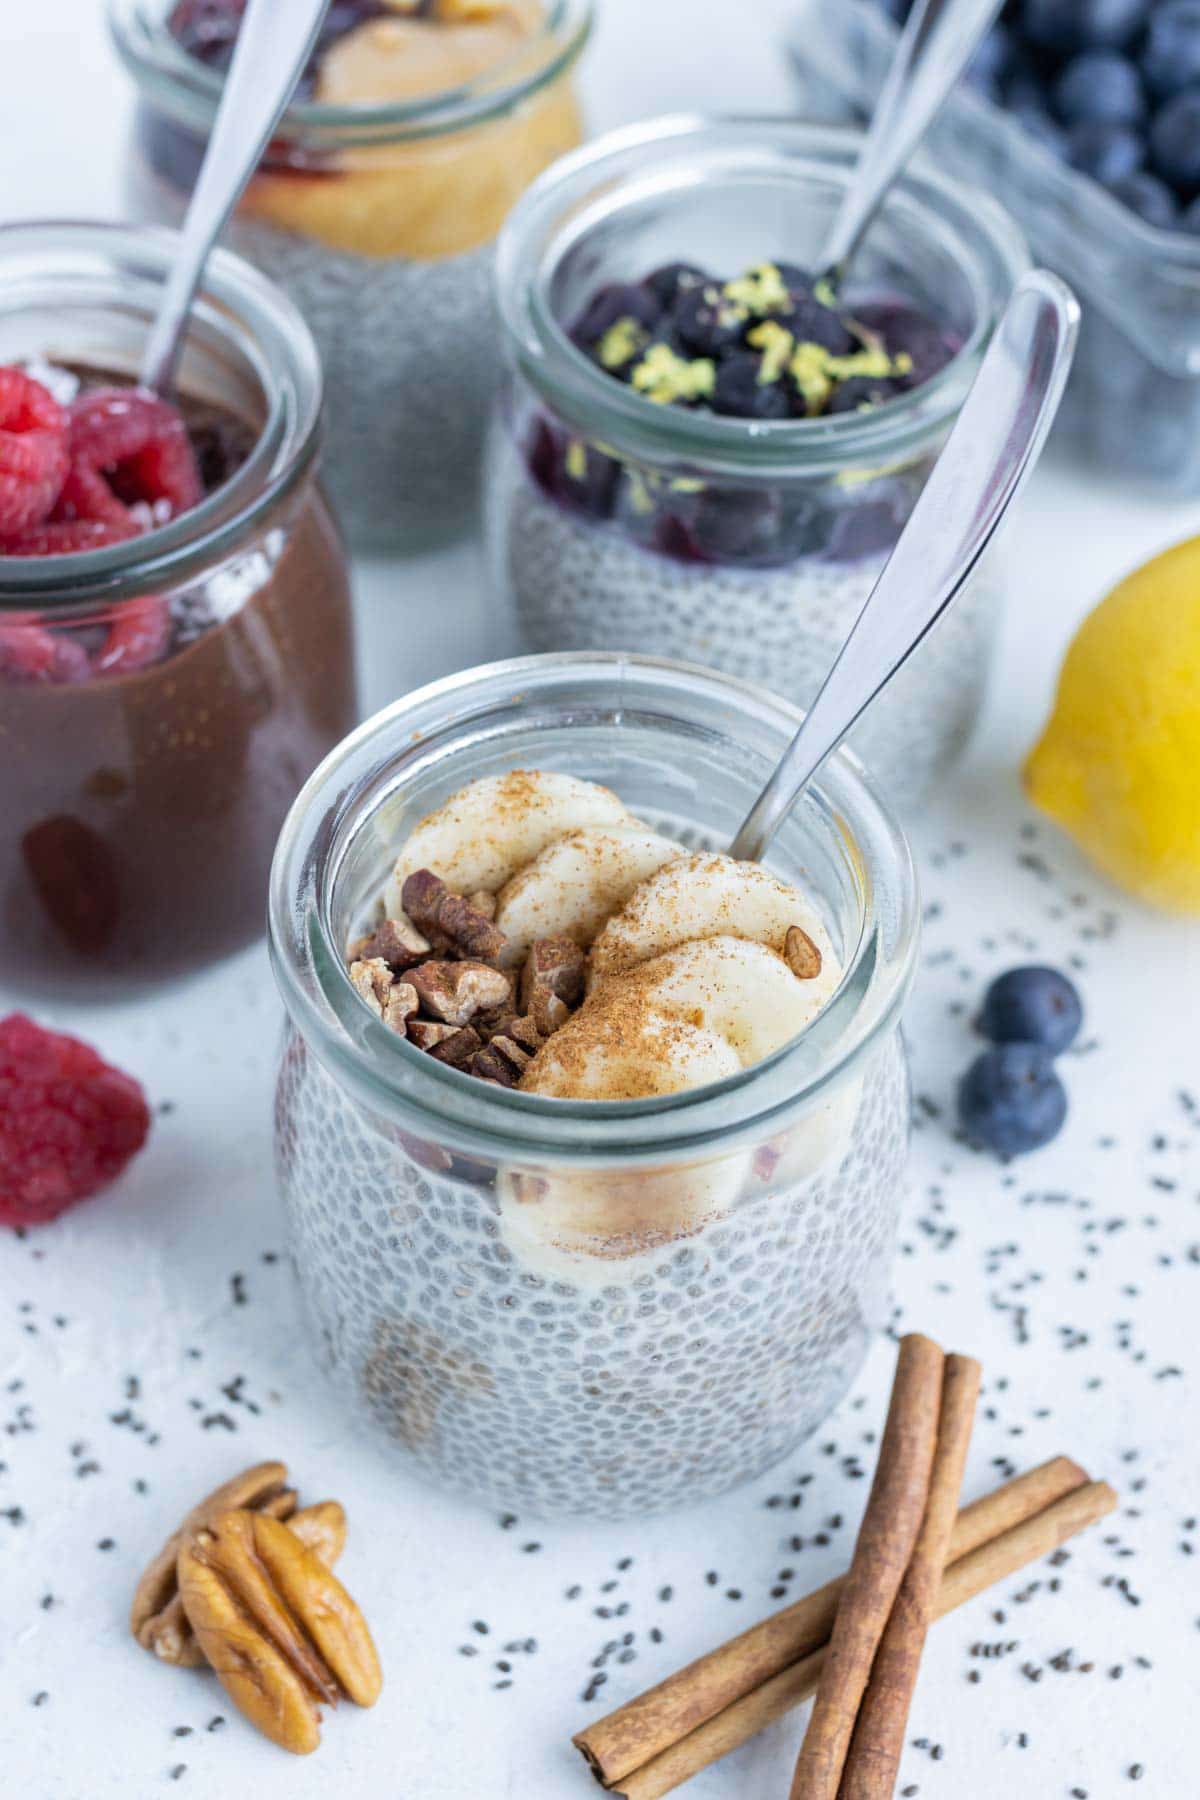 Banana nut chia seed pudding and other flavors are served for a healthy recipe.